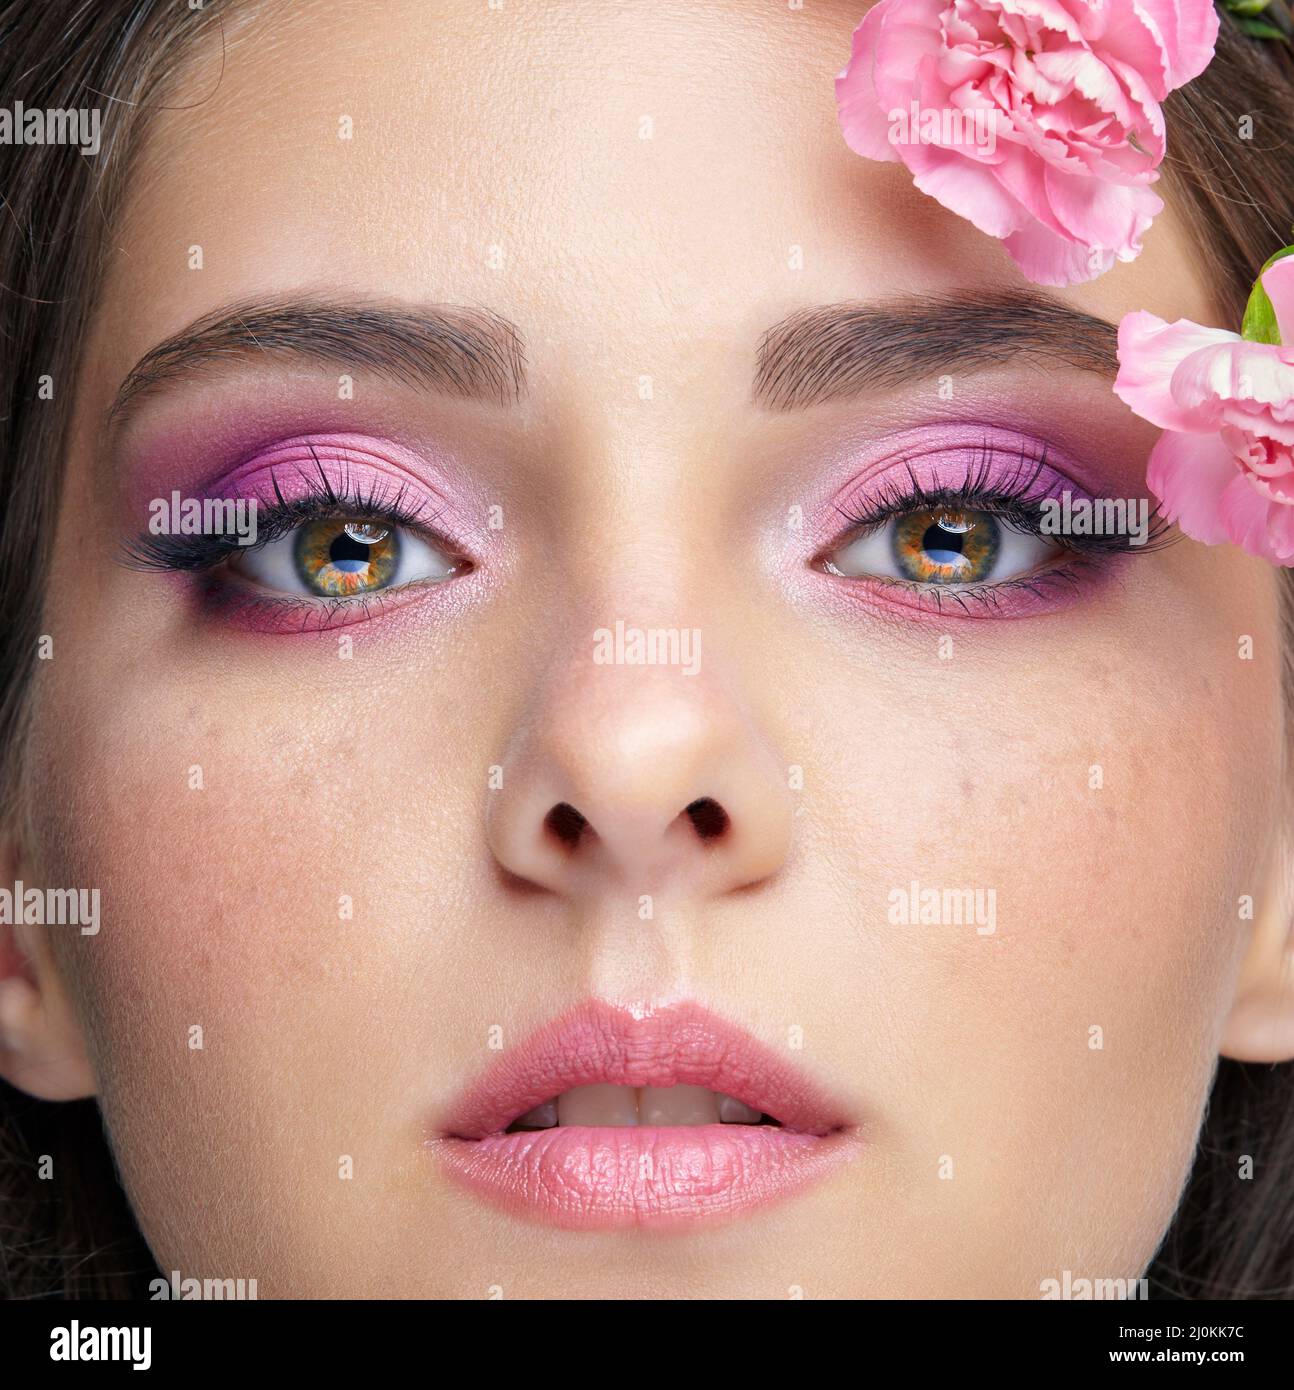 Closeup portrait of female face with pink beauty makeup and carnation flowers on the temple. Stock Photo